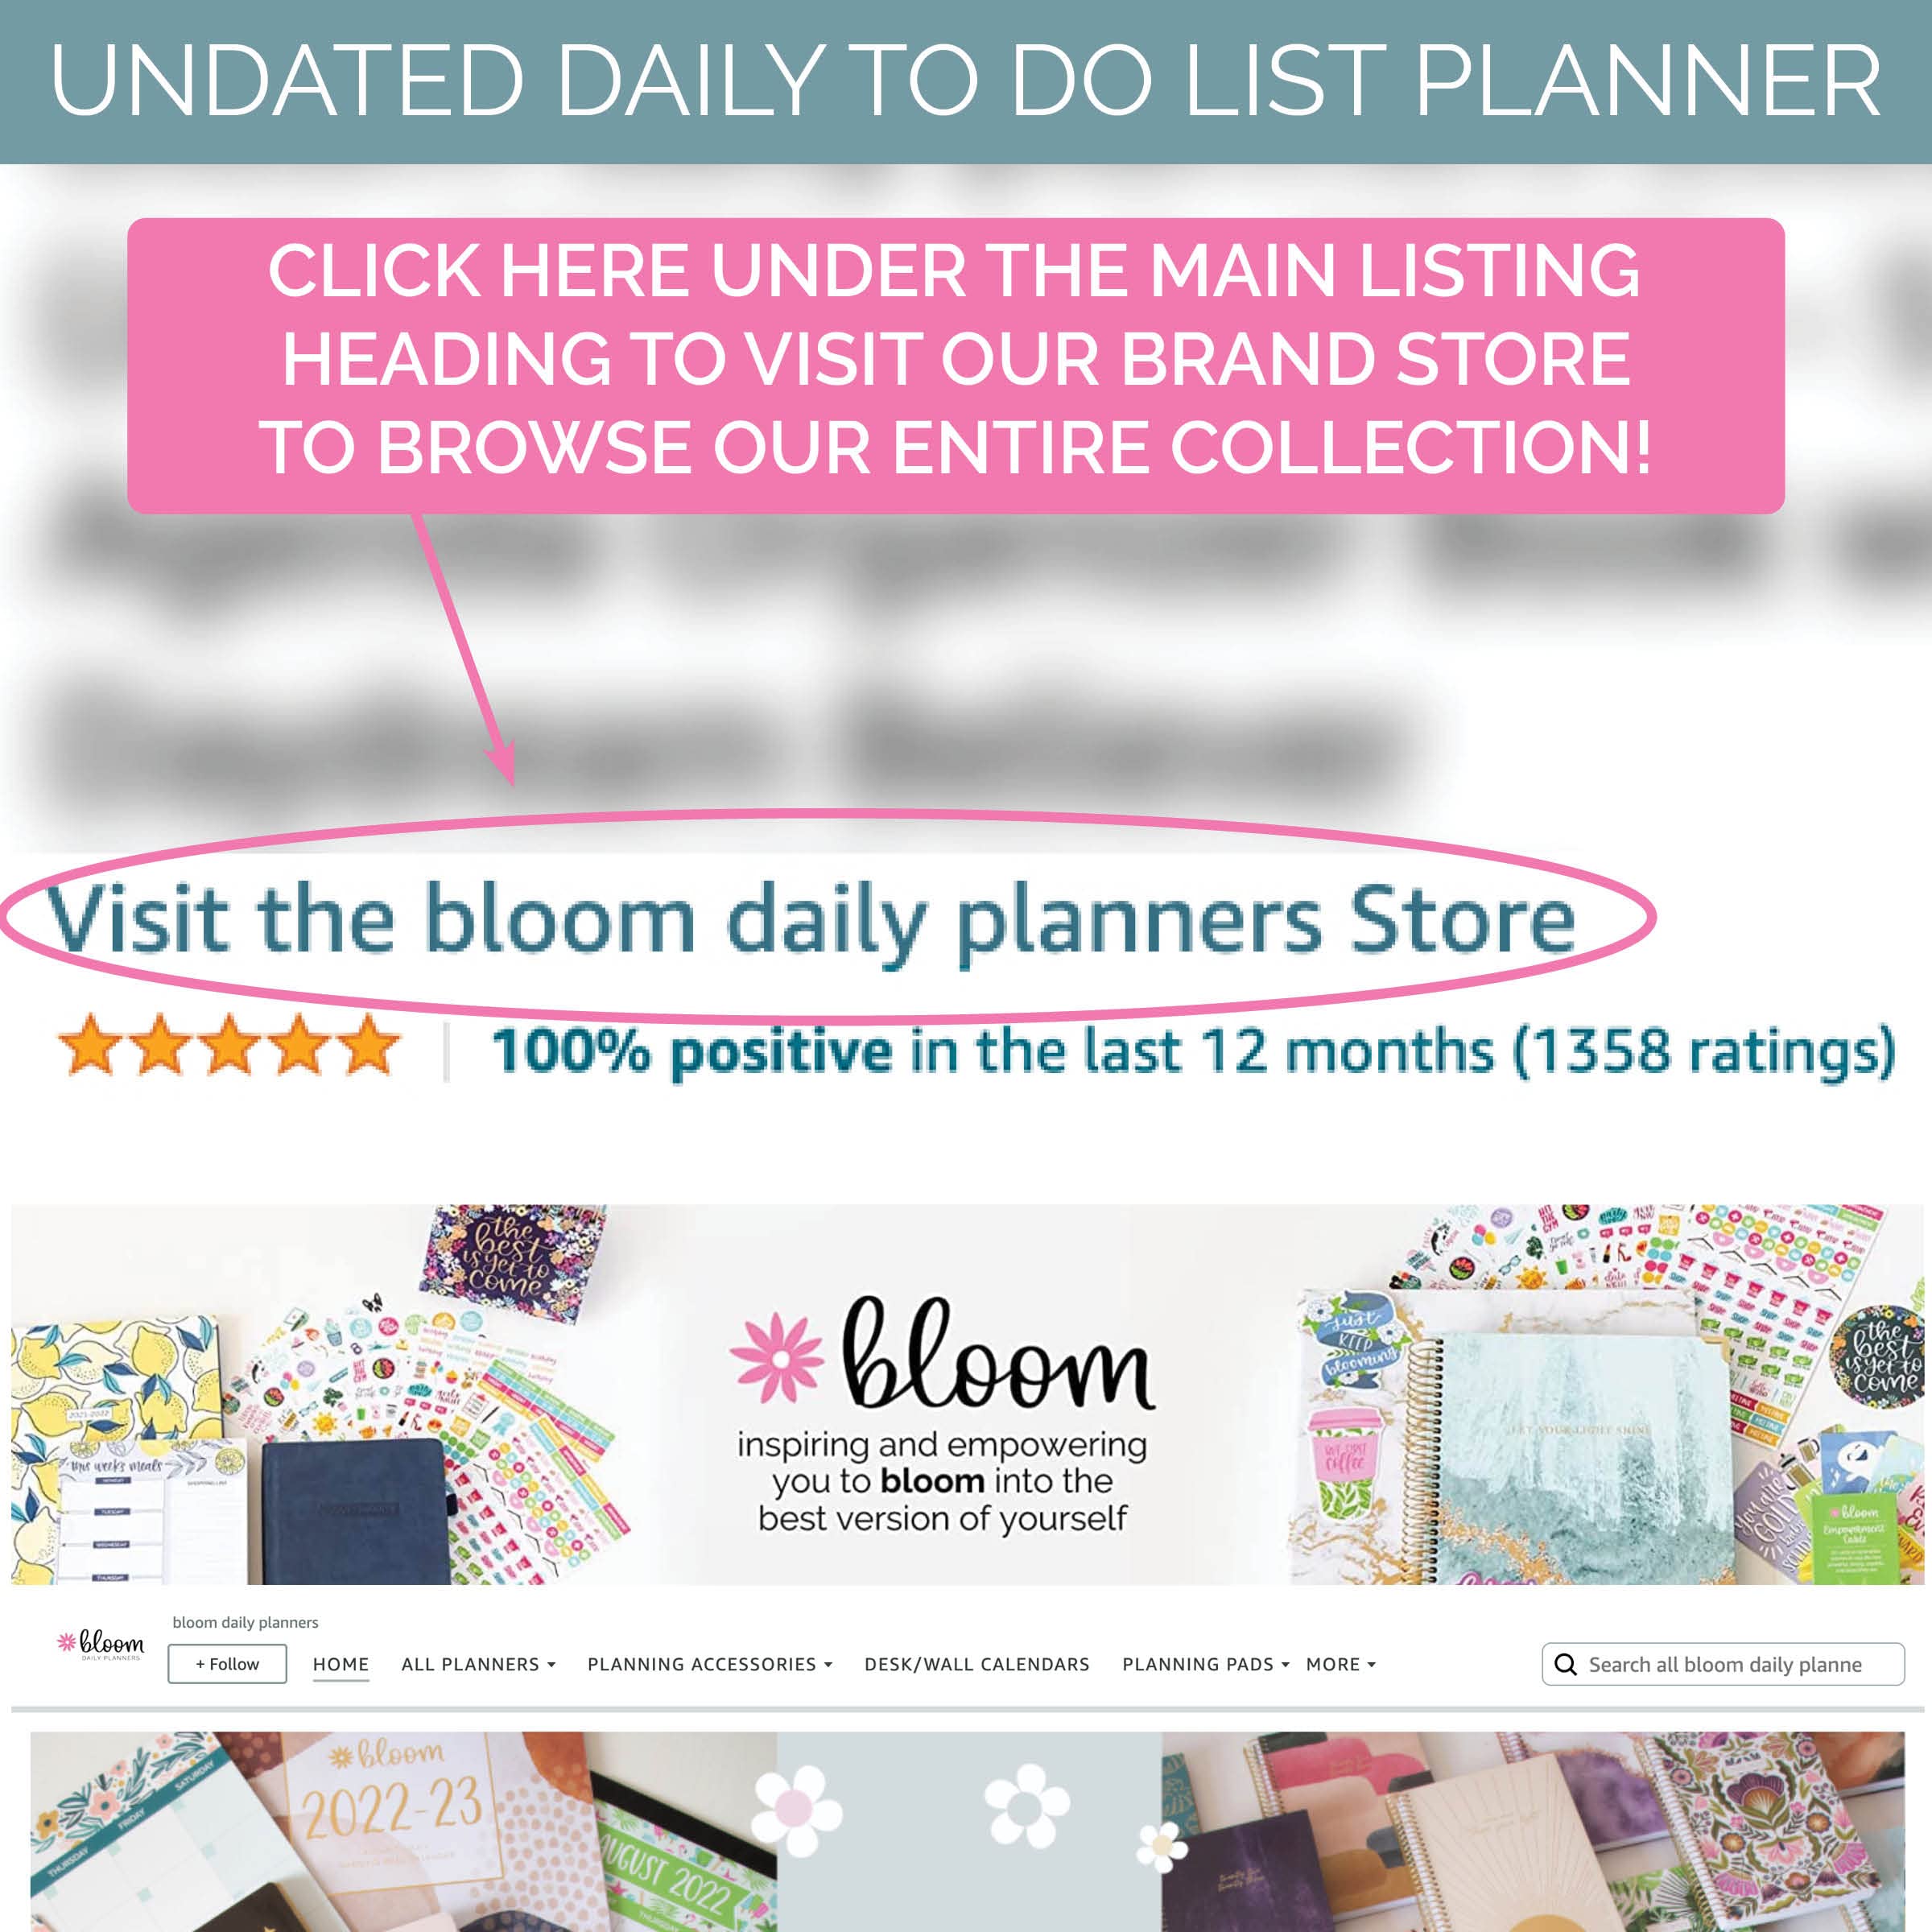 bloom daily planners New UNDATED Hardcover Calendar & Daily Bound To Do List Spiral Notebook - Notes, Goals, to Do's Planning System - 8.25" x 6.5" - Daydream Believer